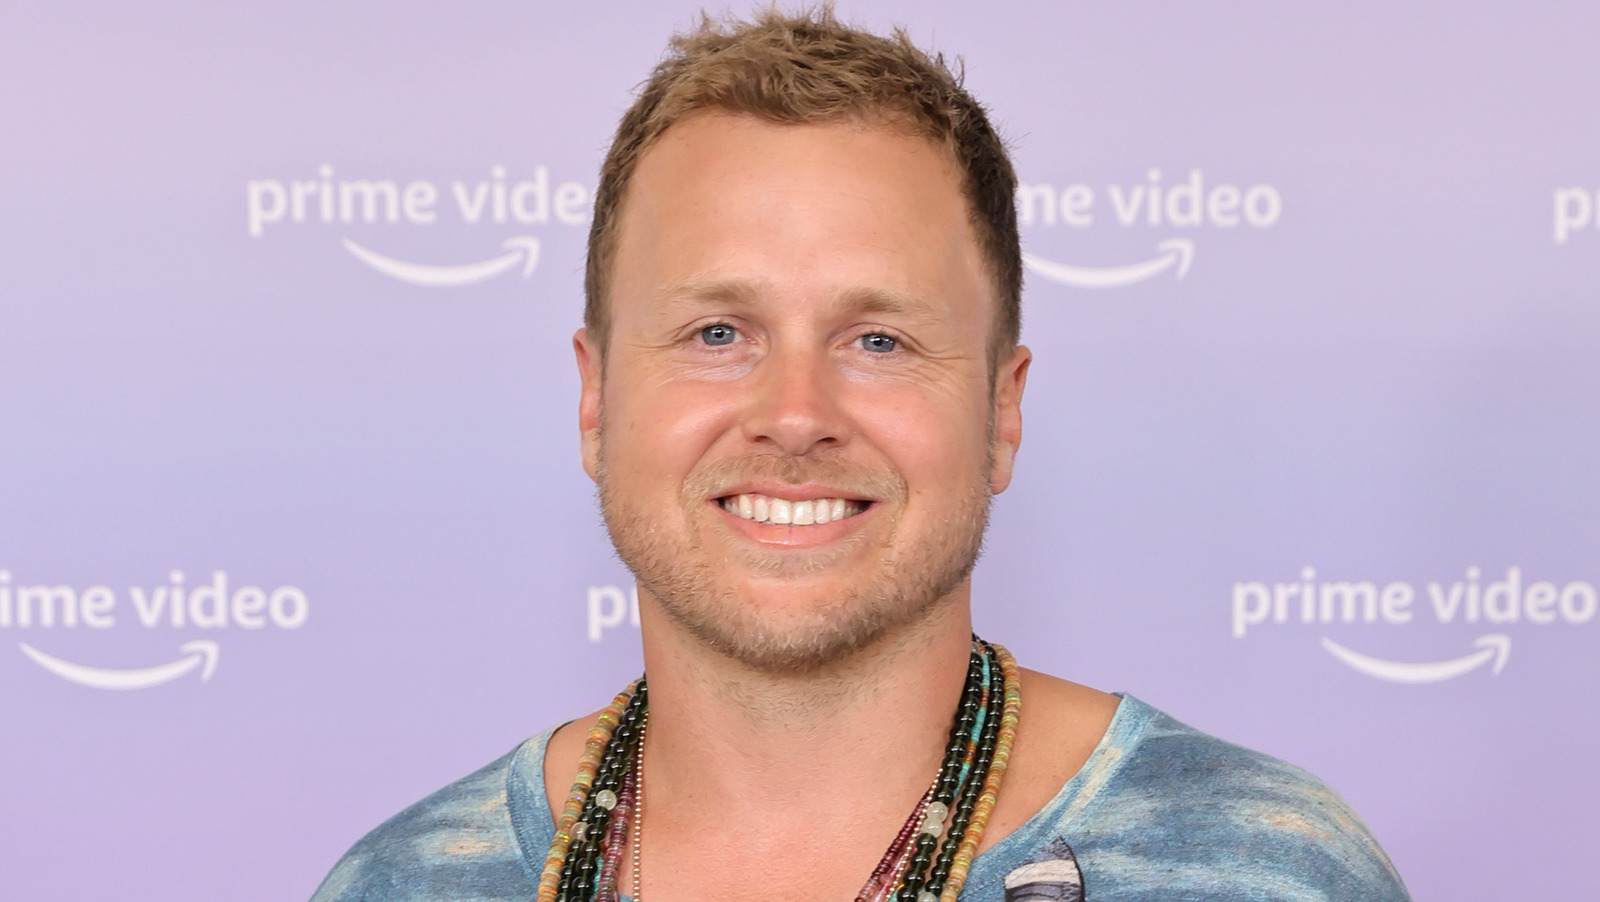 spencer pratt says he has on good authority meghan and harry are living separate lives